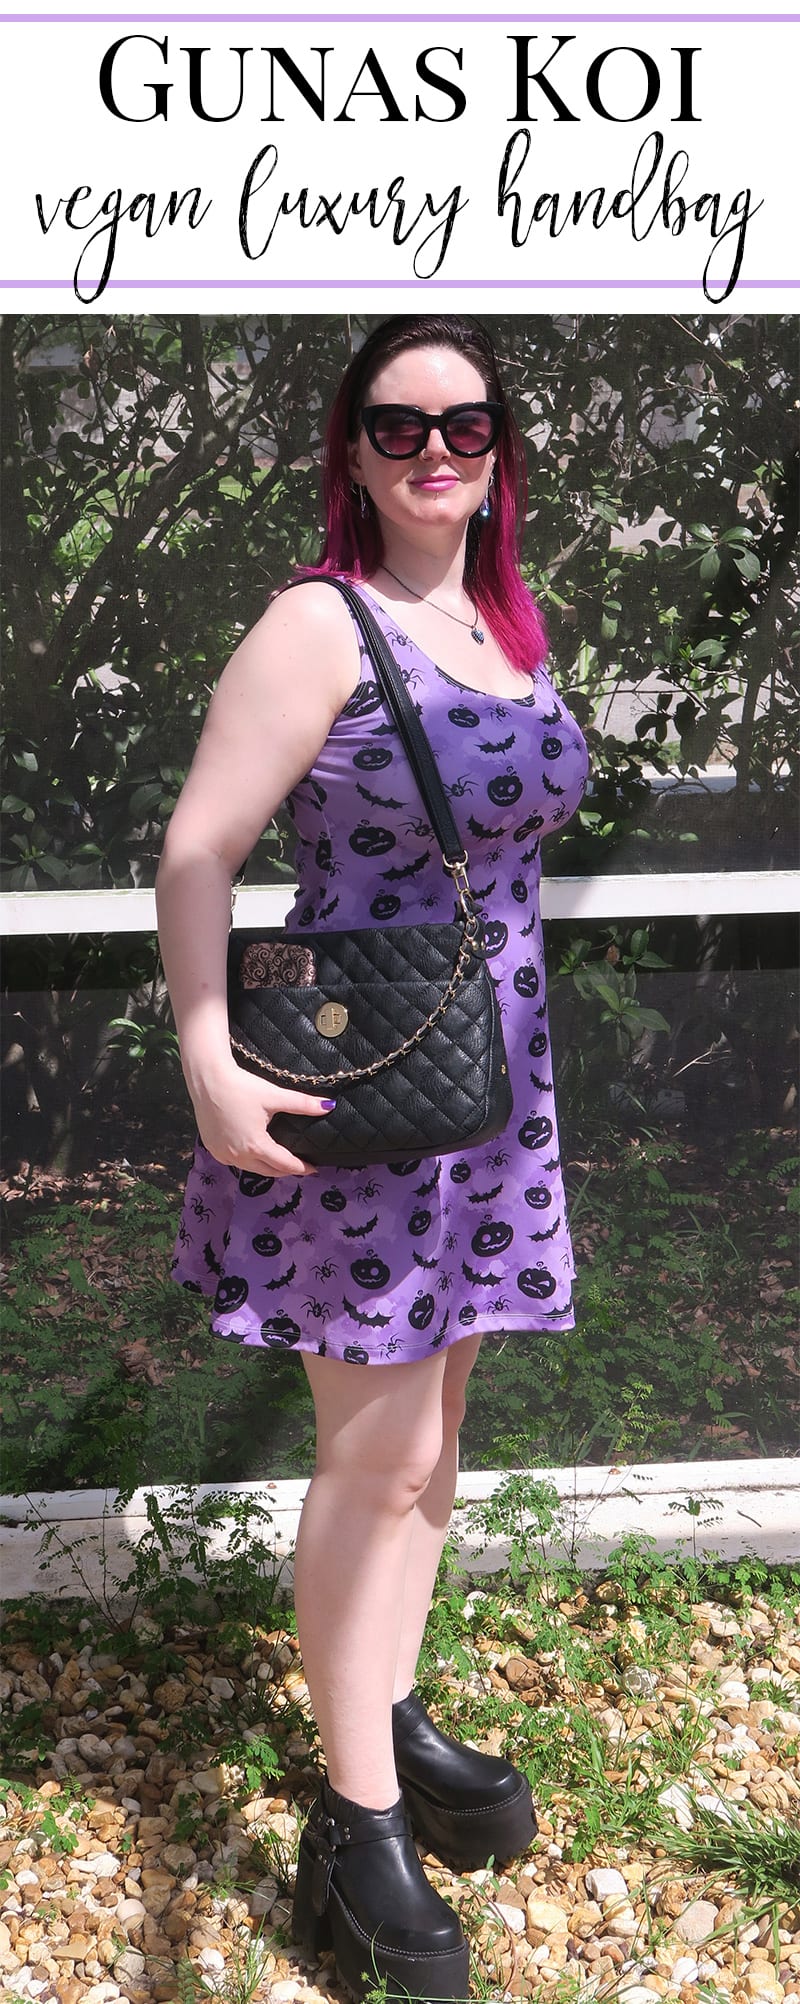 Gunas Koi Vegan Luxury Handbag Review. The Koi is a vegan dupe for a Chanel purse! It's a classic, understated design that goes with anything and has everyday functionality. I love it!